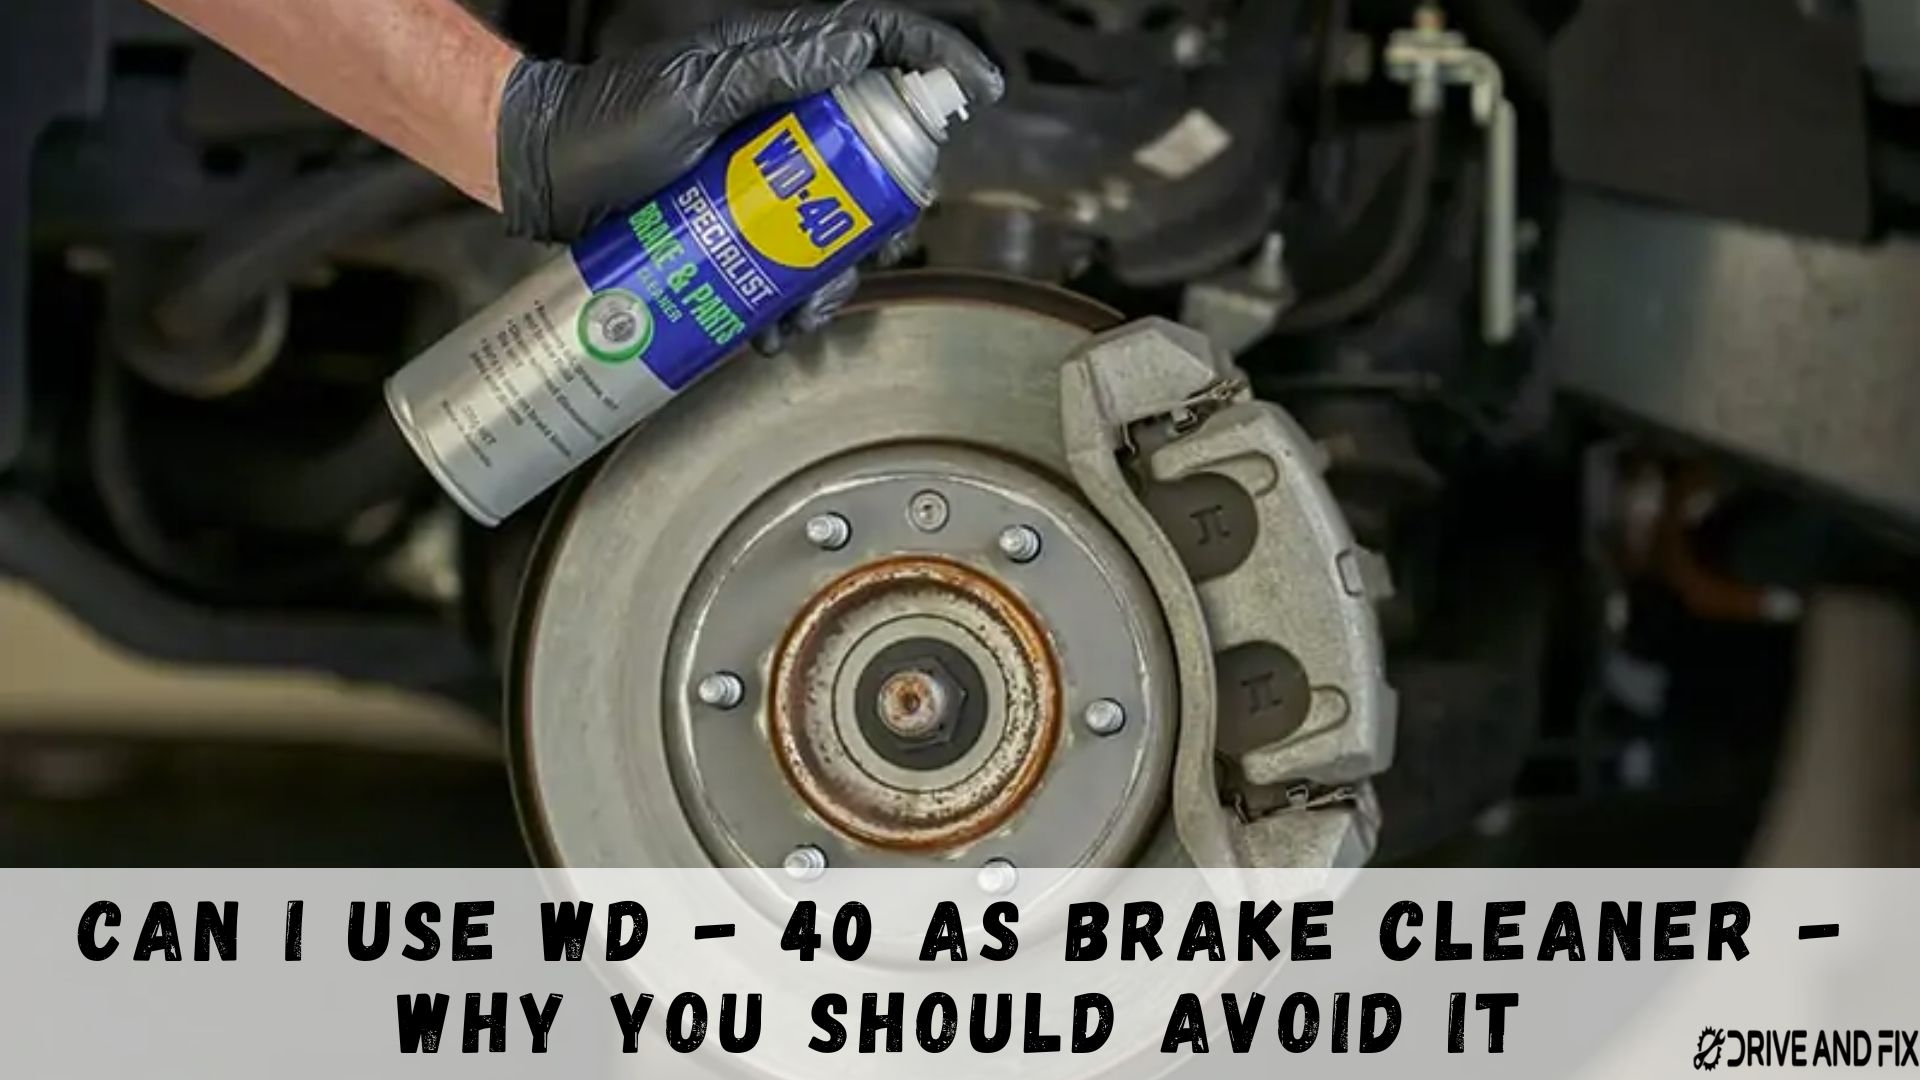 Can I Use WD - 40 As Brake Cleaner - Why You Should Avoid It